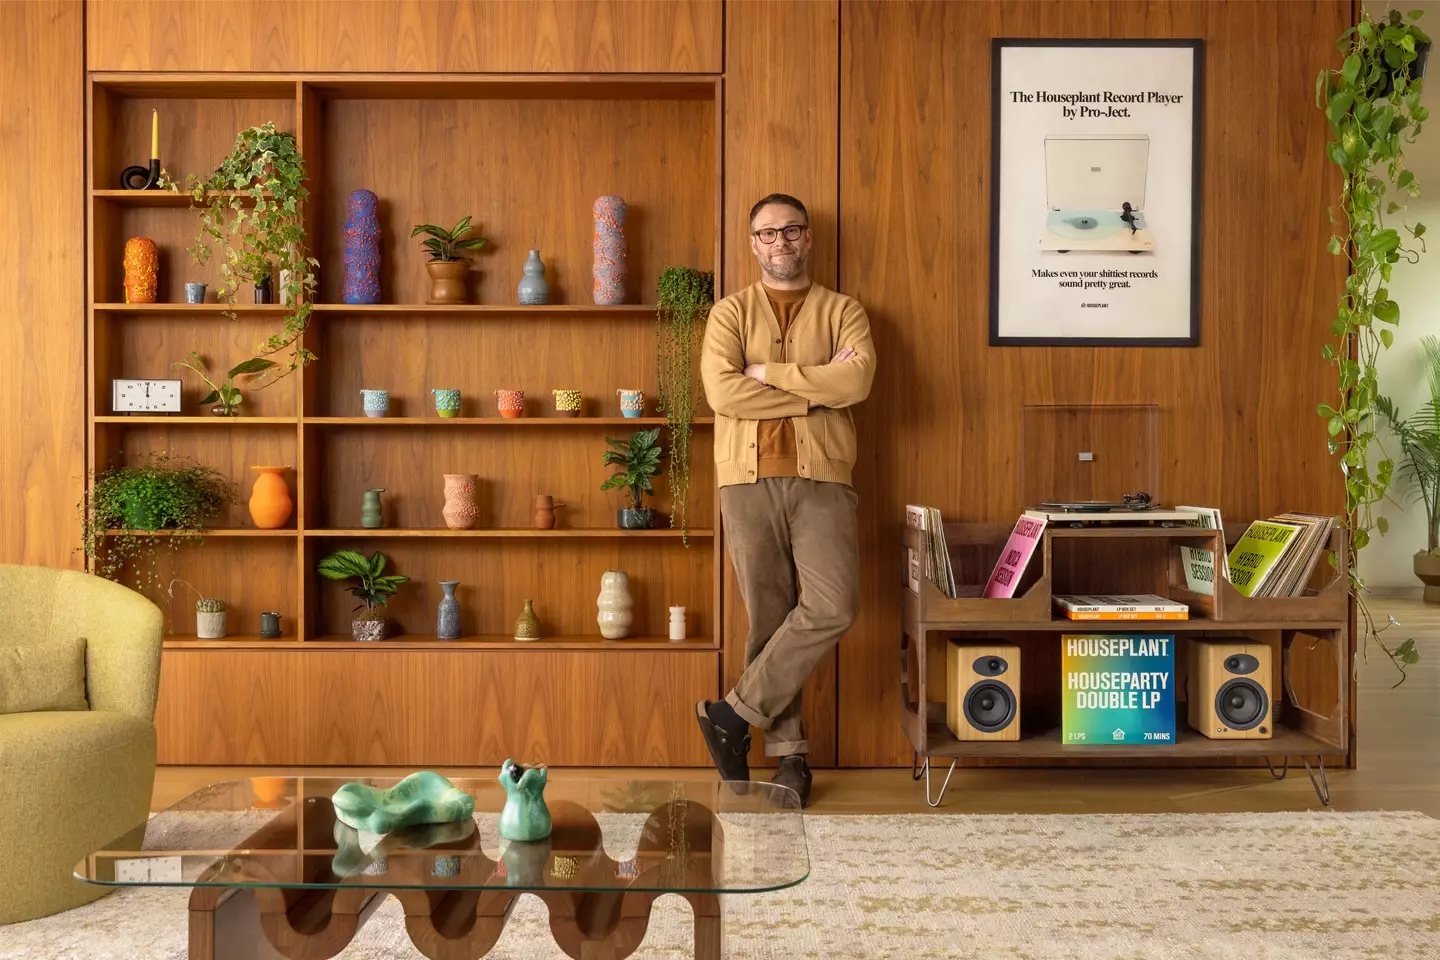 Rogen stood proudly with his homemade pottery collection.